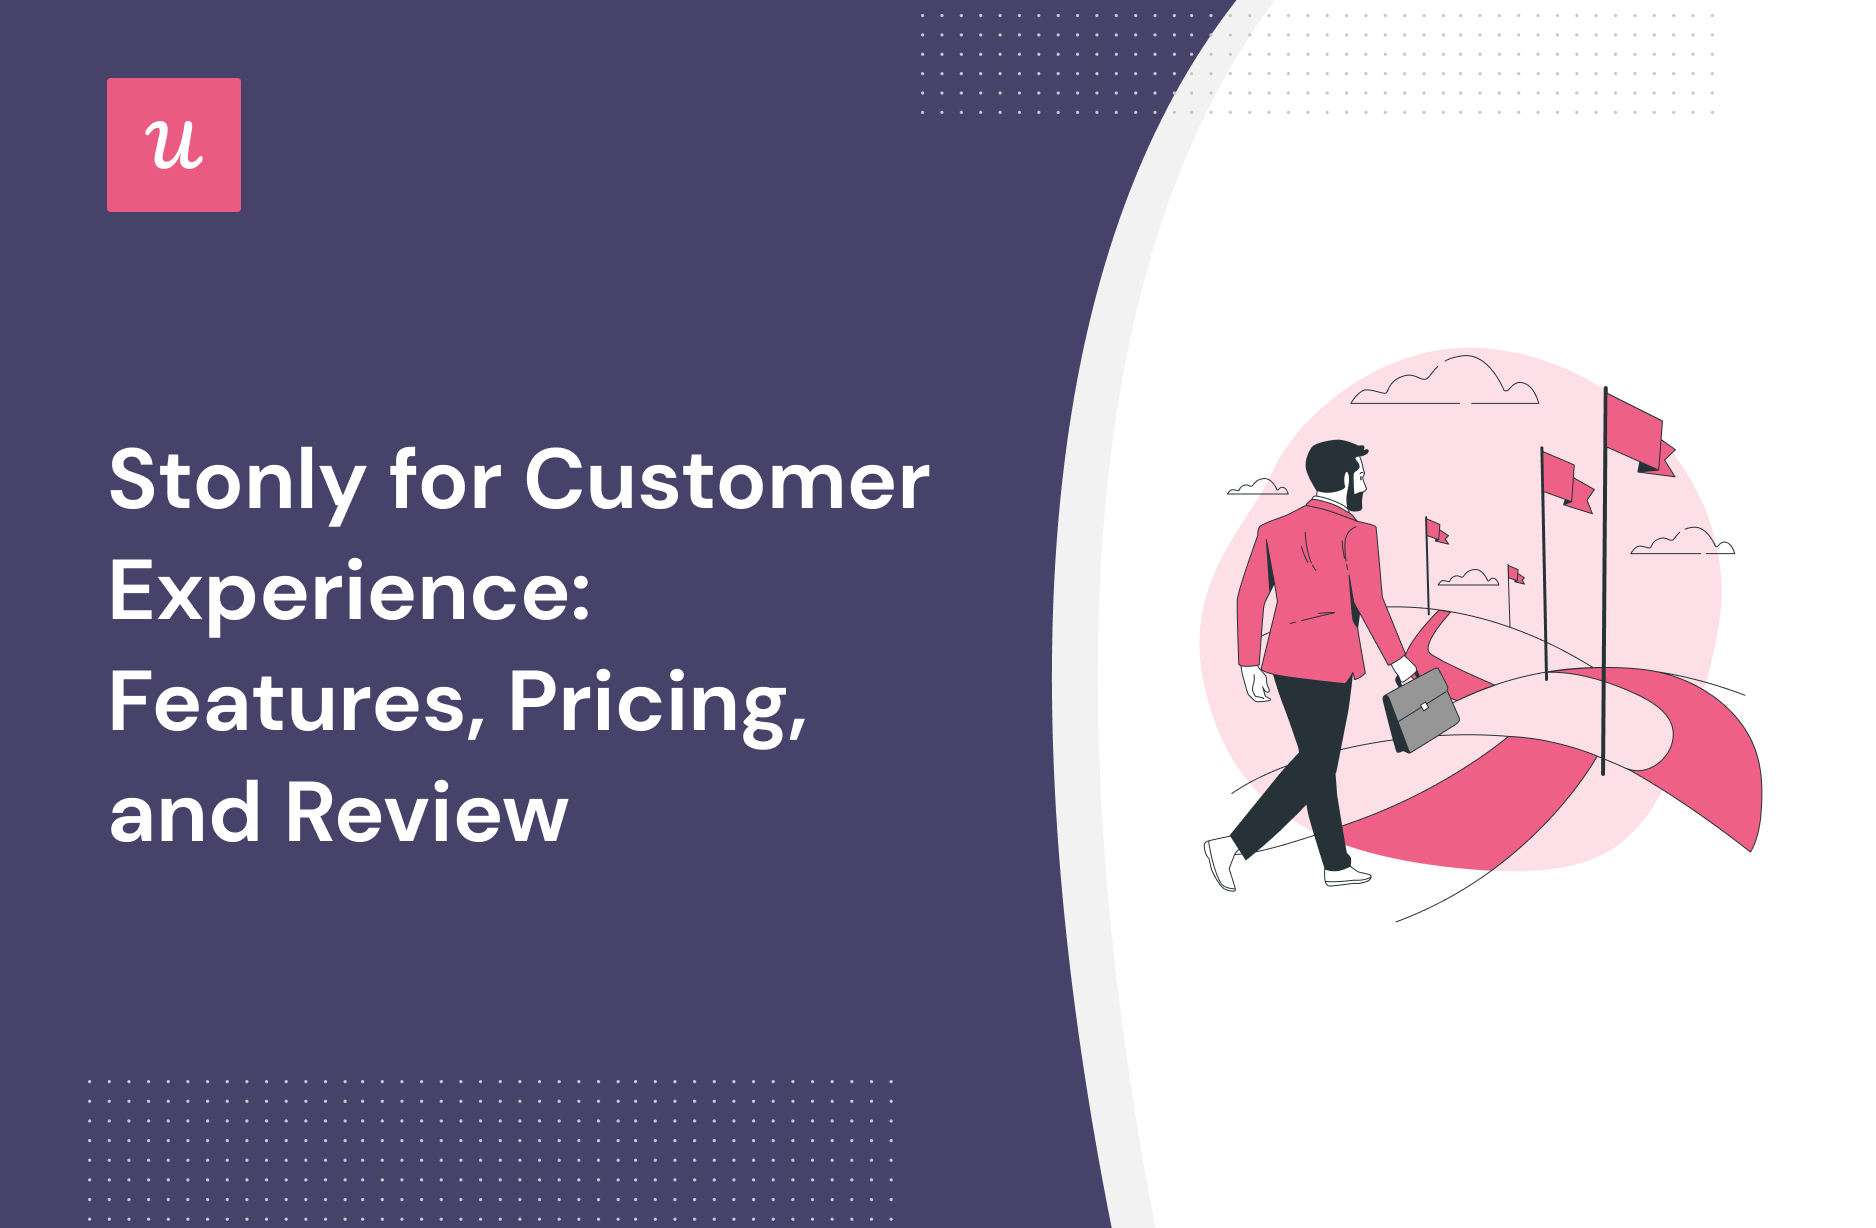 Stonly for Customer Experience: Features, Pricing, and Review